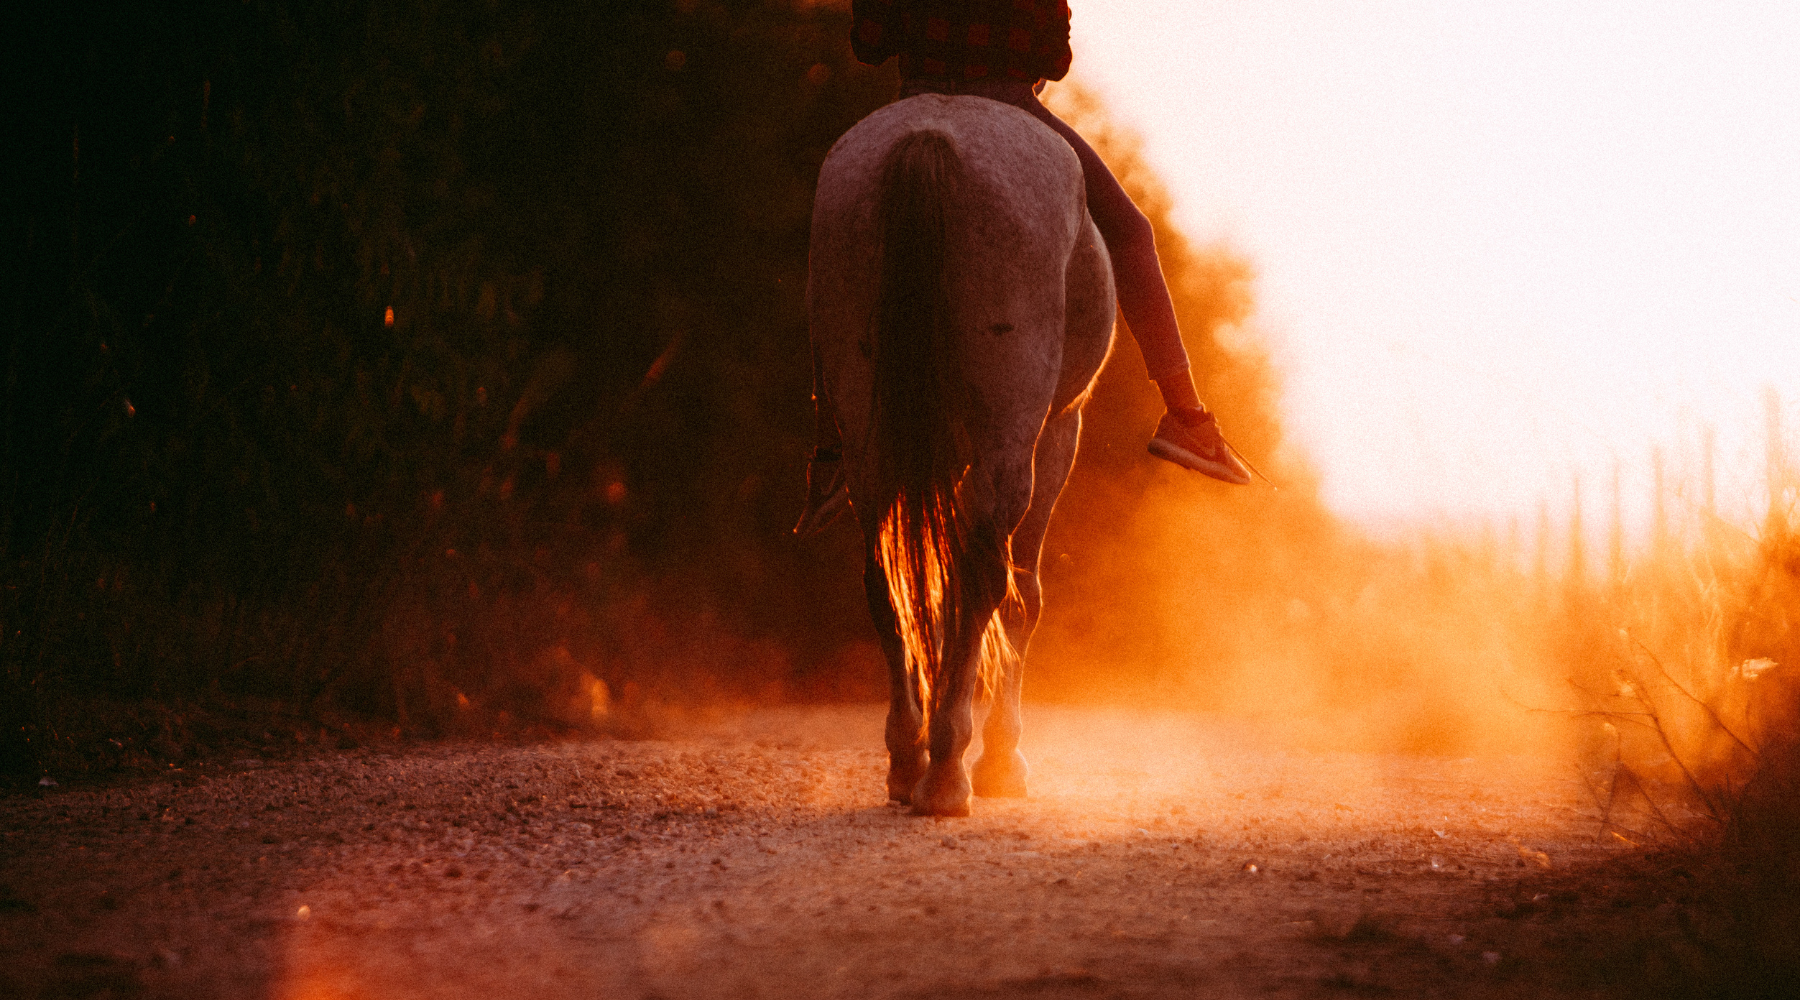 Feel The Horse’s Movement And Get Your Timing Right